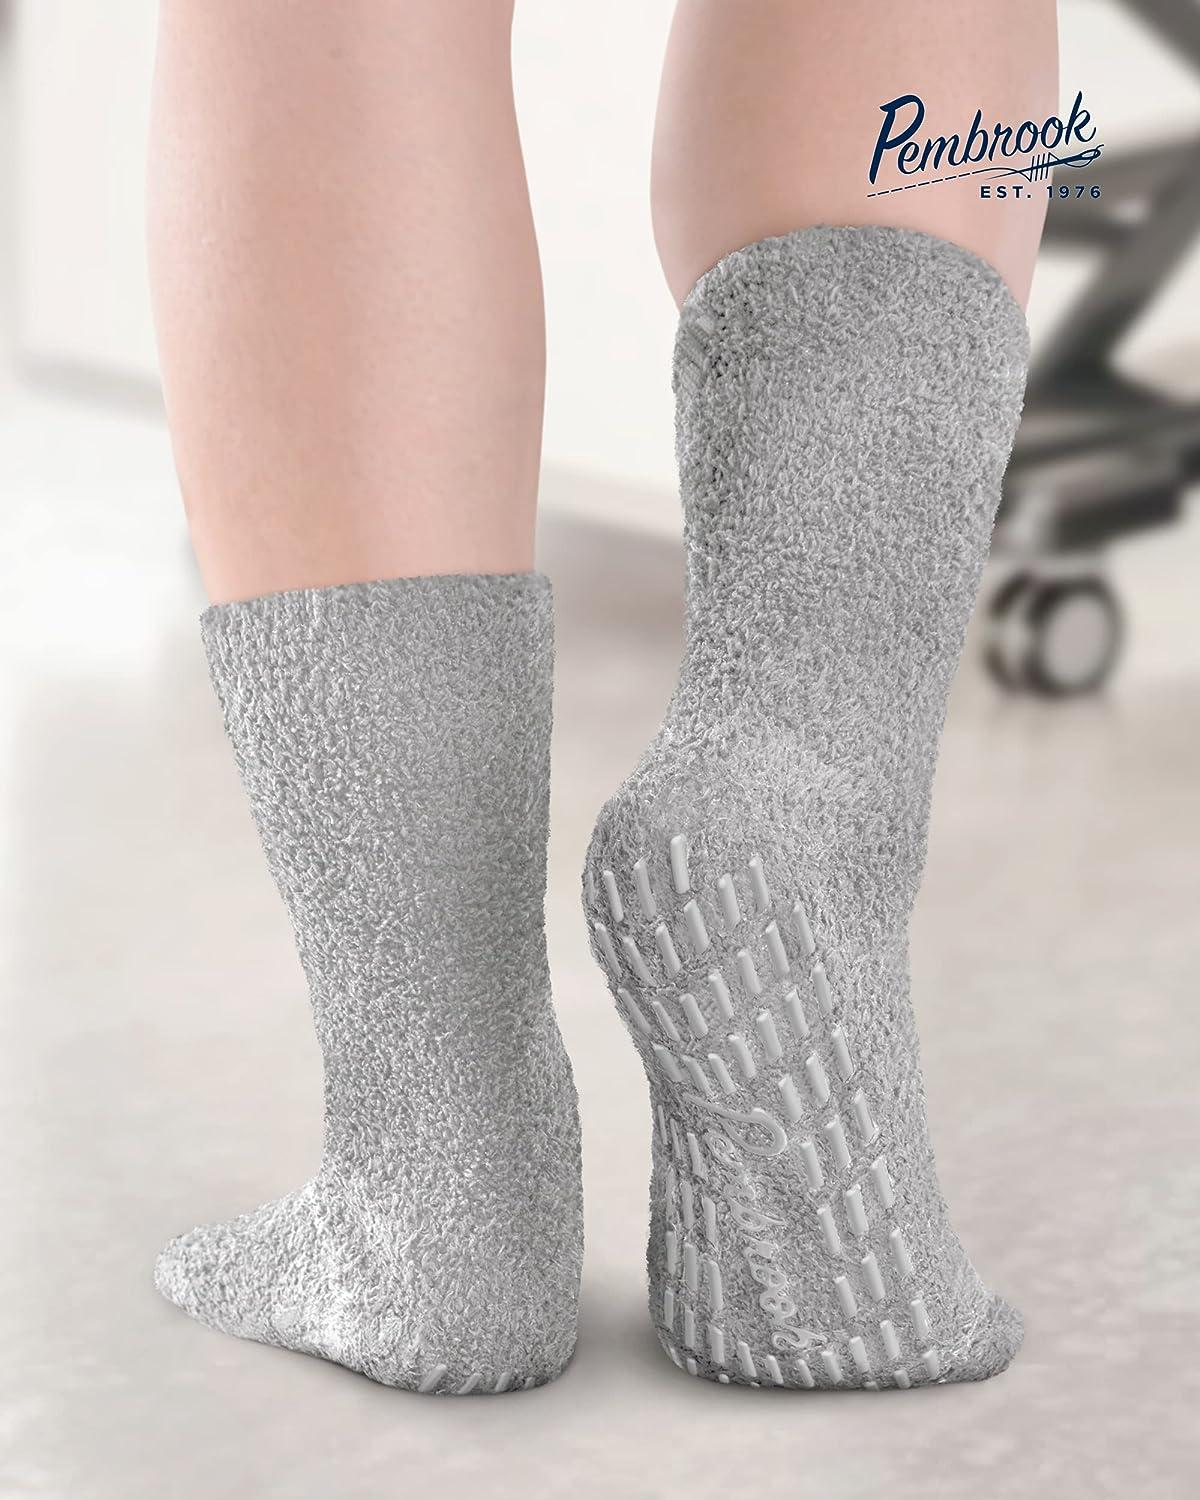 Pembrook Grip Socks for Women and Men - 6 Pairs Barre Socks with